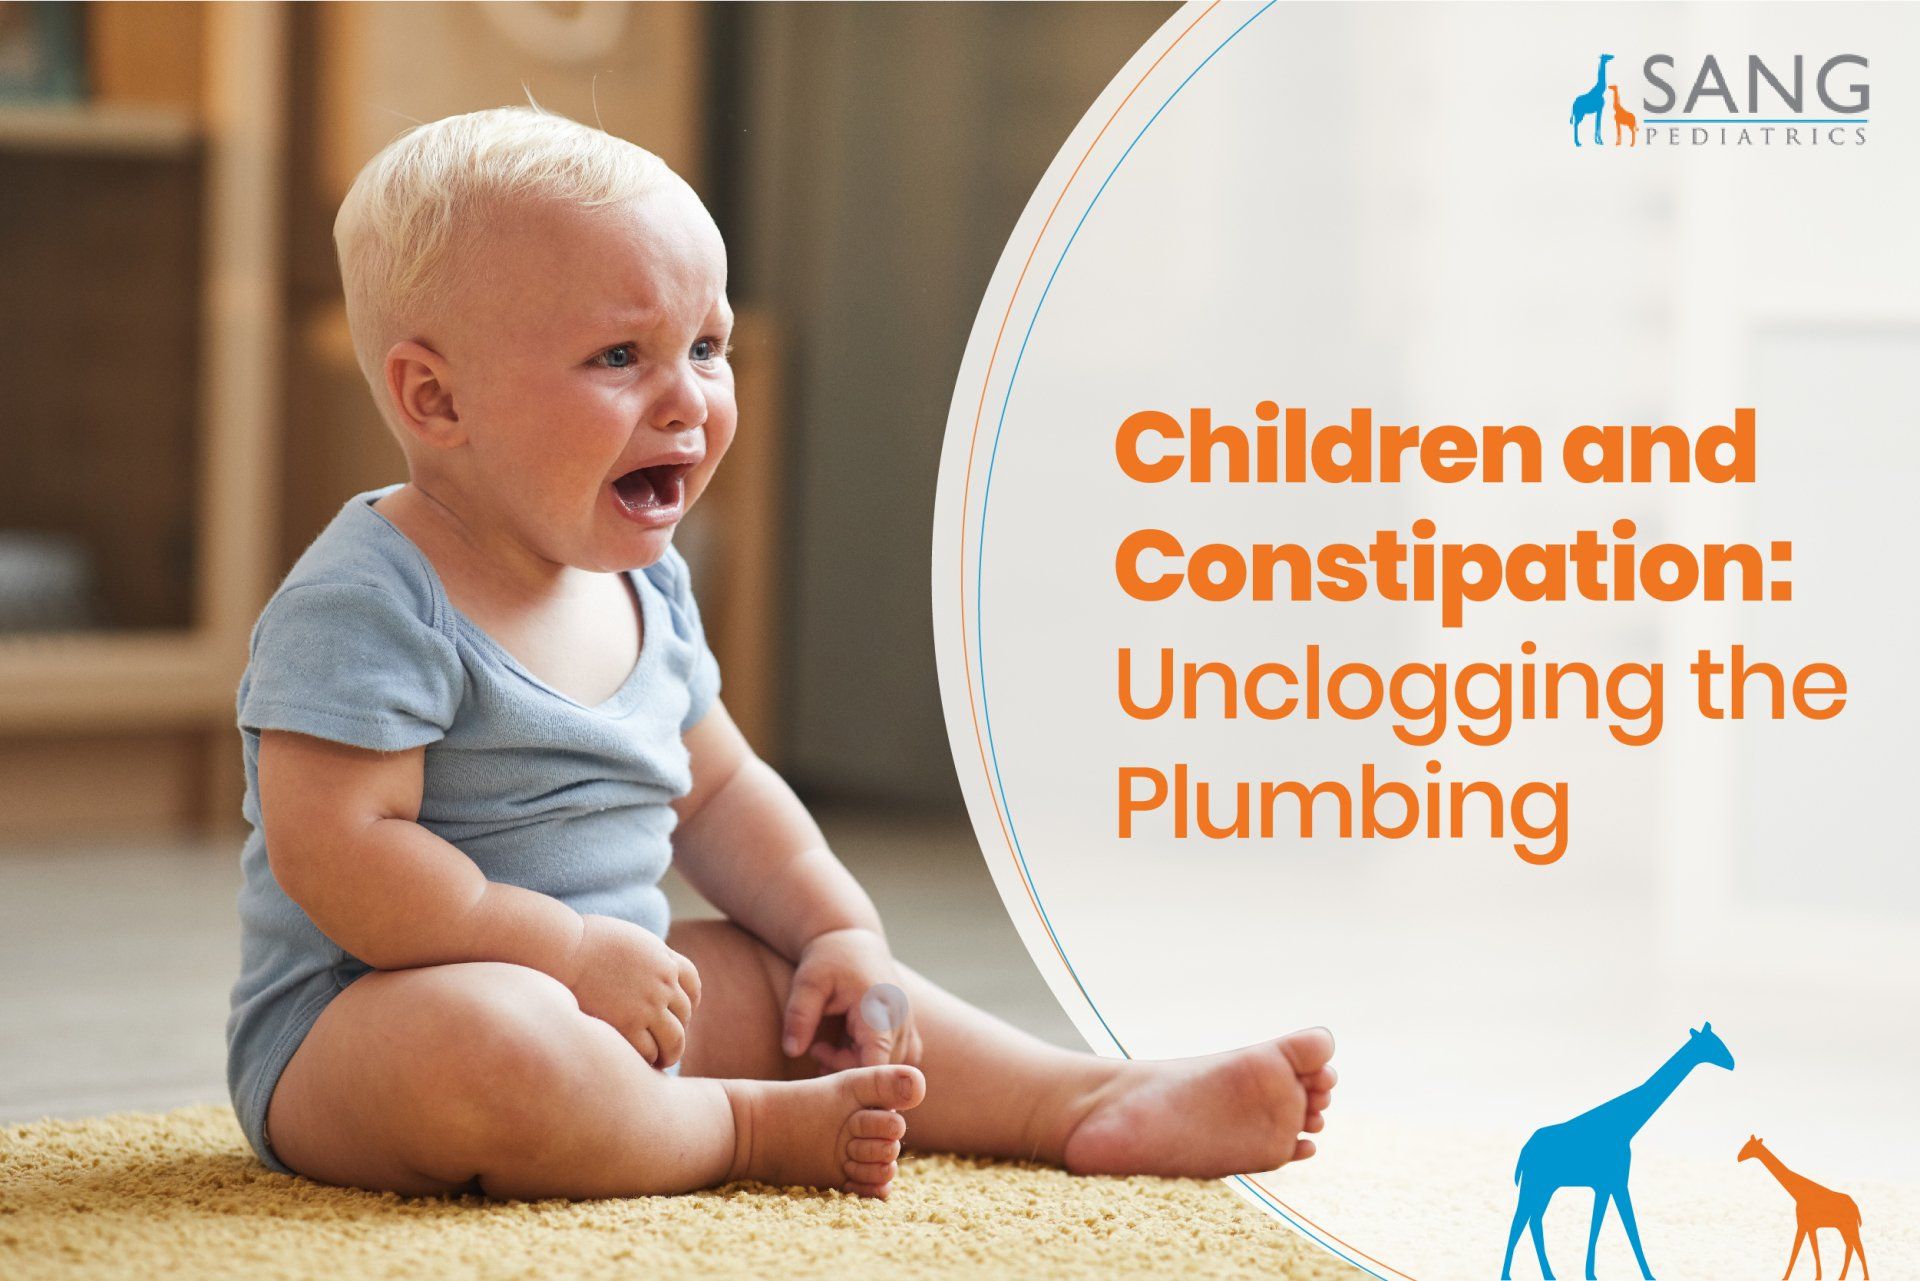 Children and Constipation: Unclogging the Plumbing